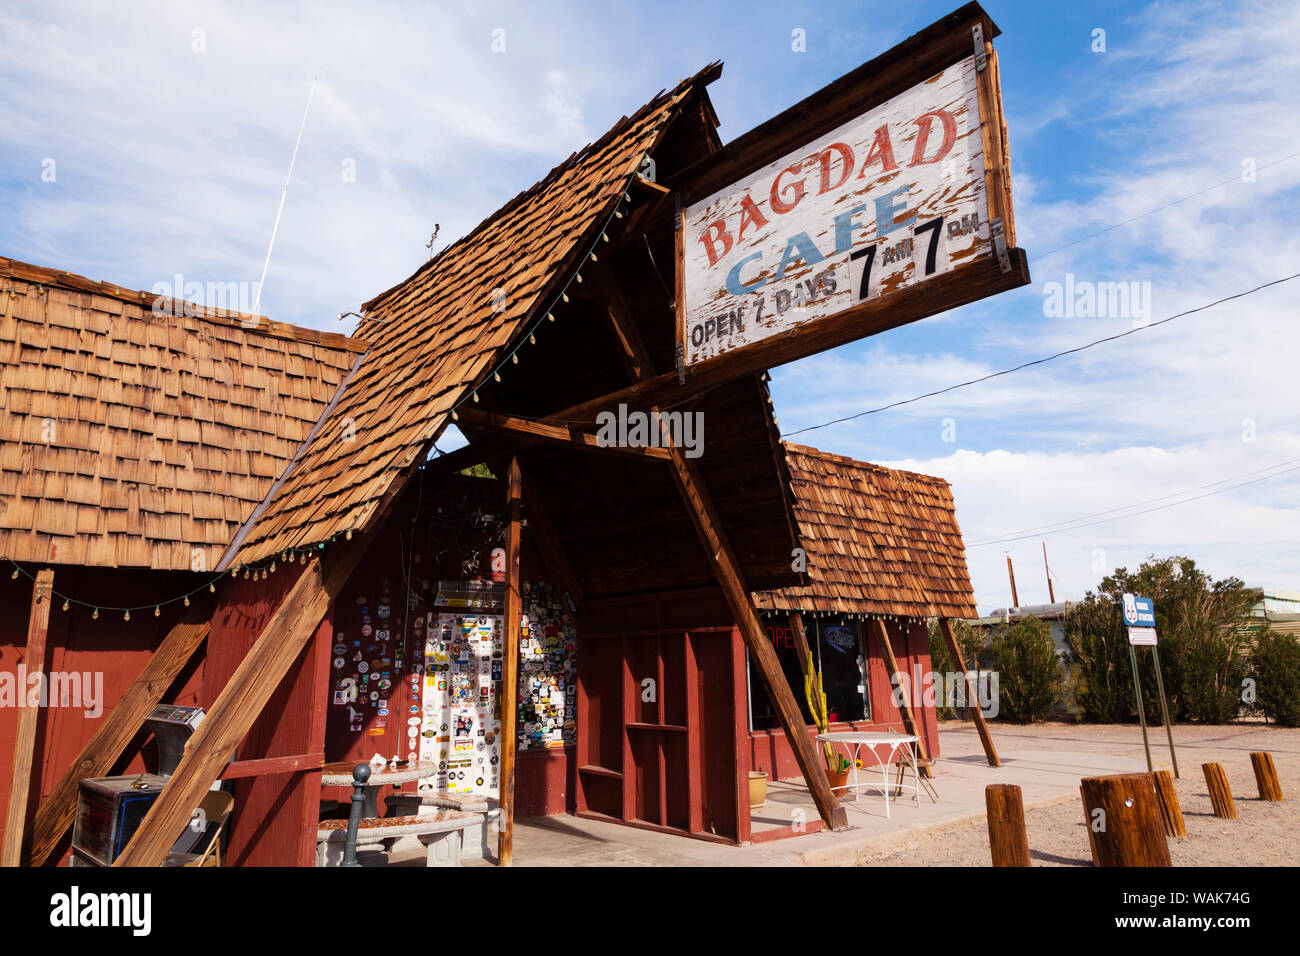 Bagdad Cafe on Route 66 in the Mojave Desert, California, USA Stock Photo